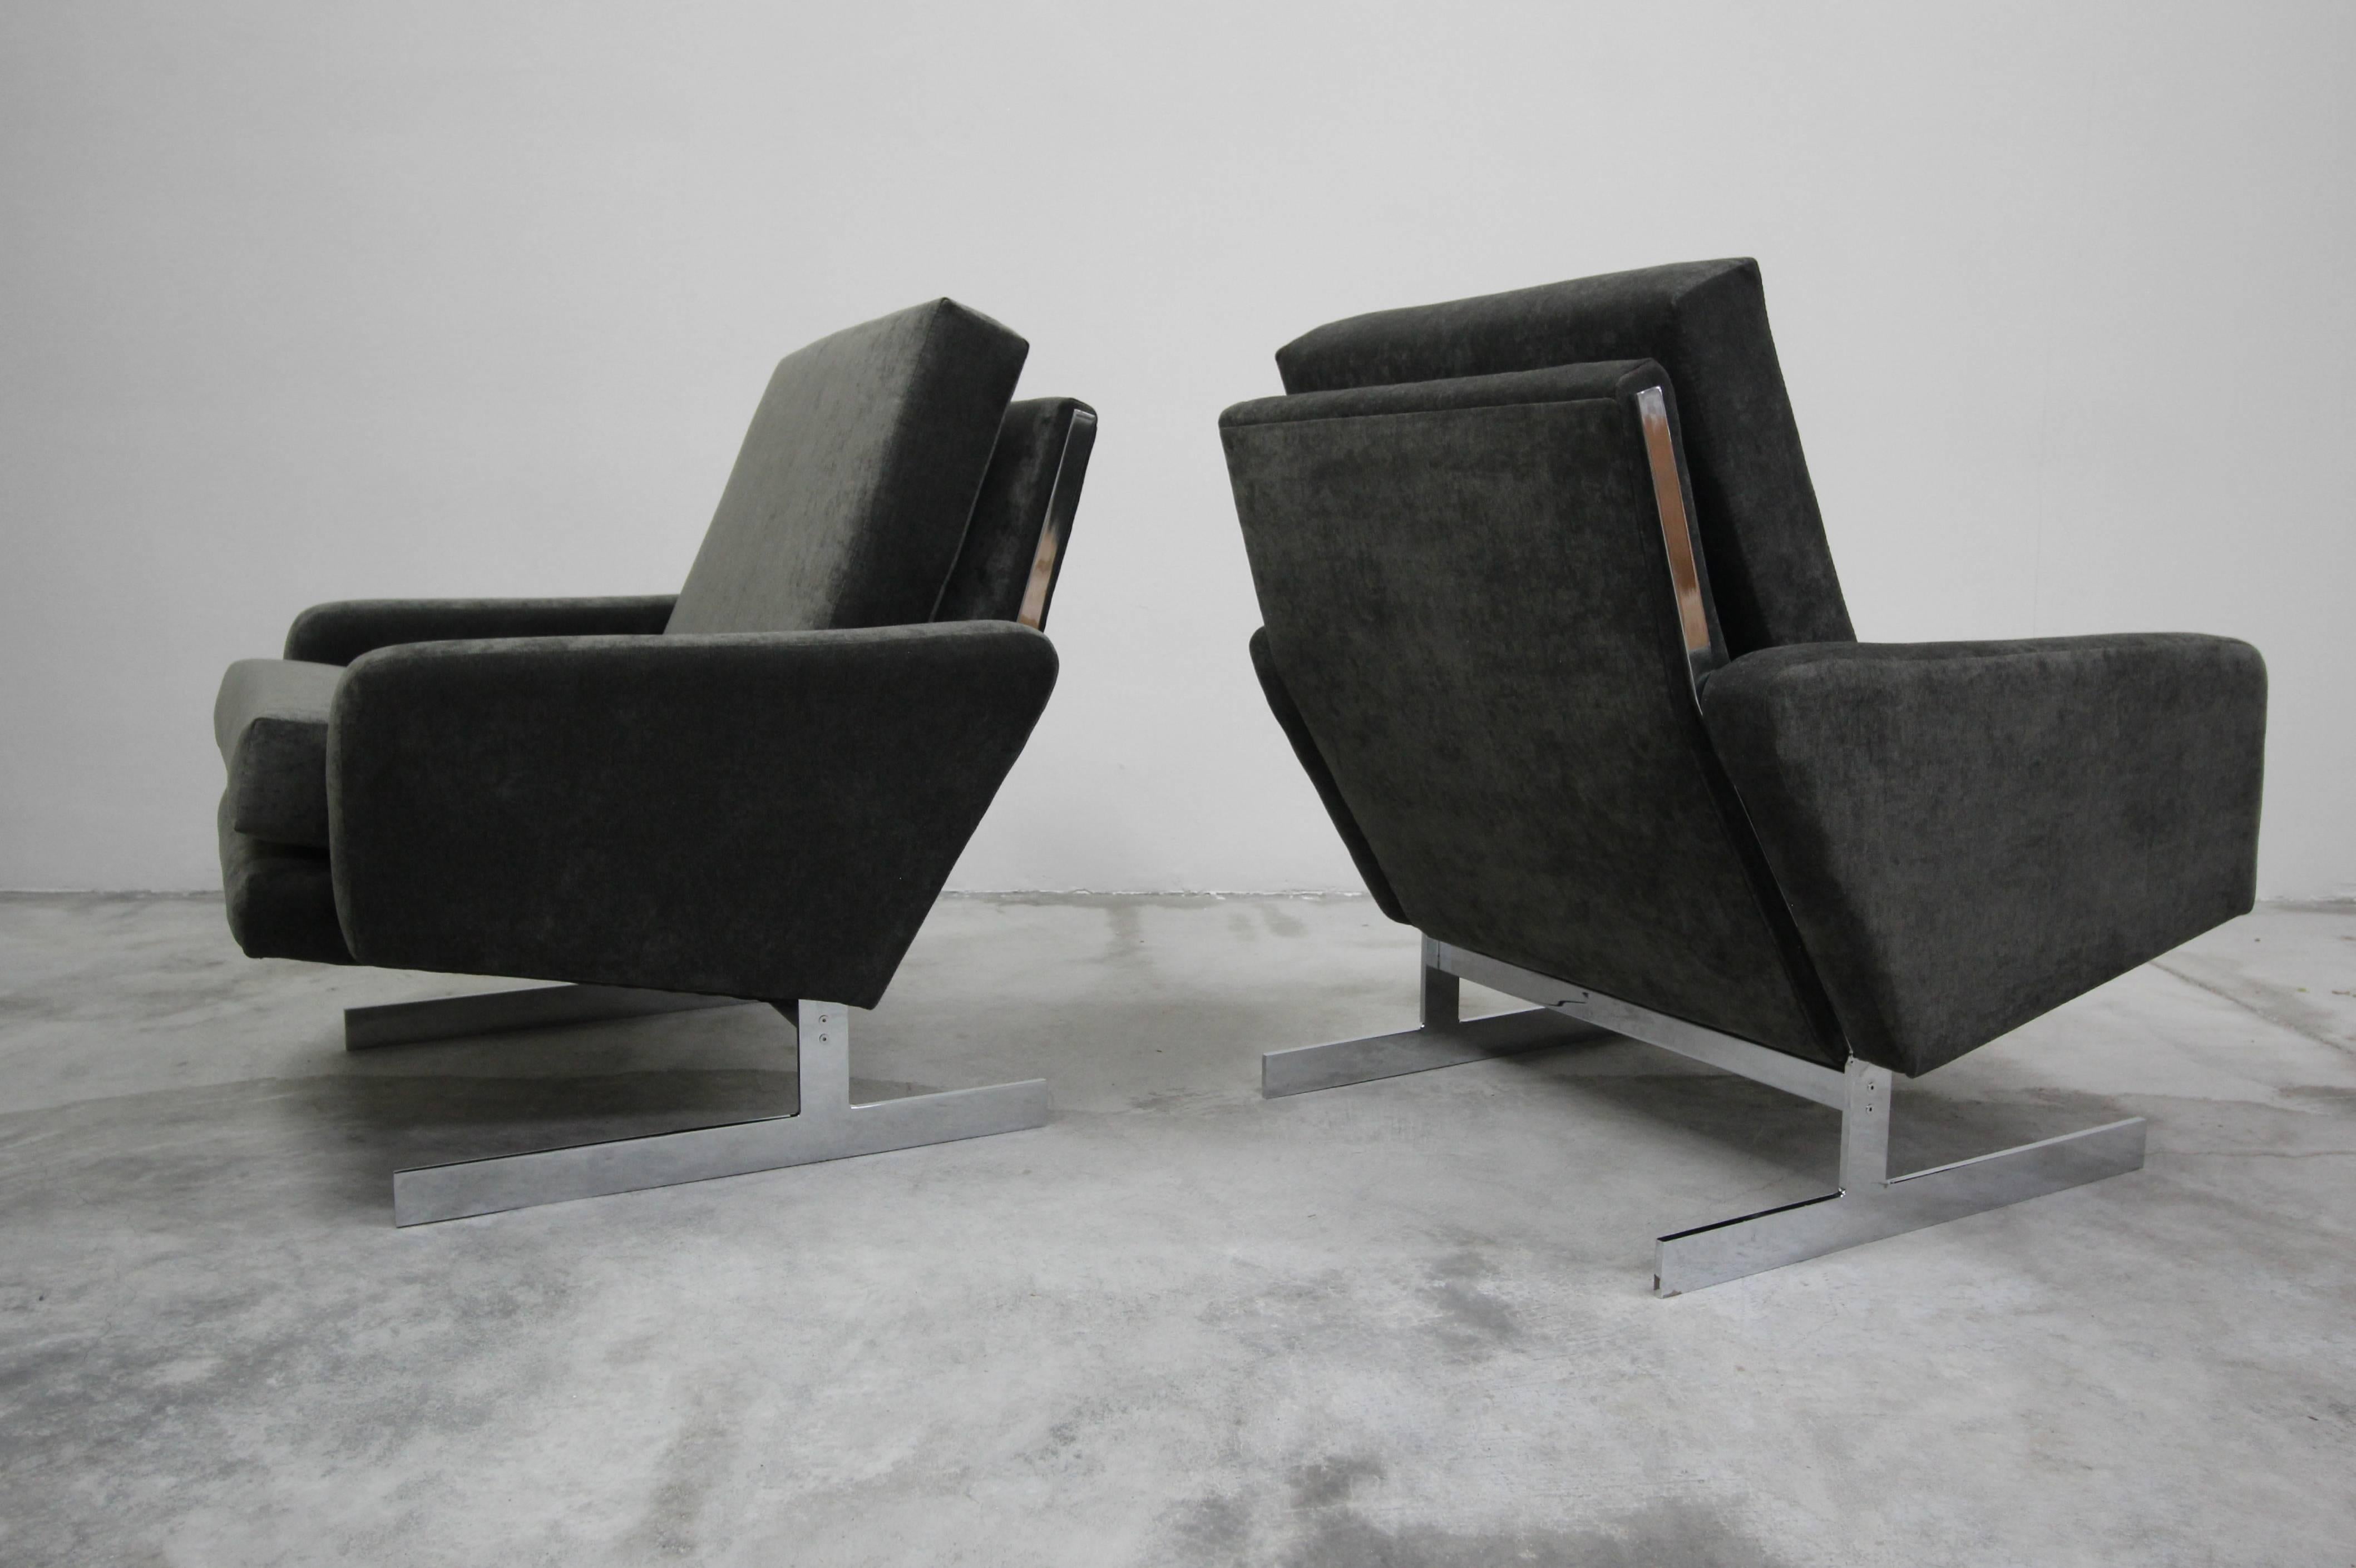 Exquisite pair of midcentury chromed steel, cantilever lounge chairs. These chairs are the real deal quality. They have a beautiful profile. The mirrored chrome frames are continuous and run through the entire side of the chair. Chairs have been